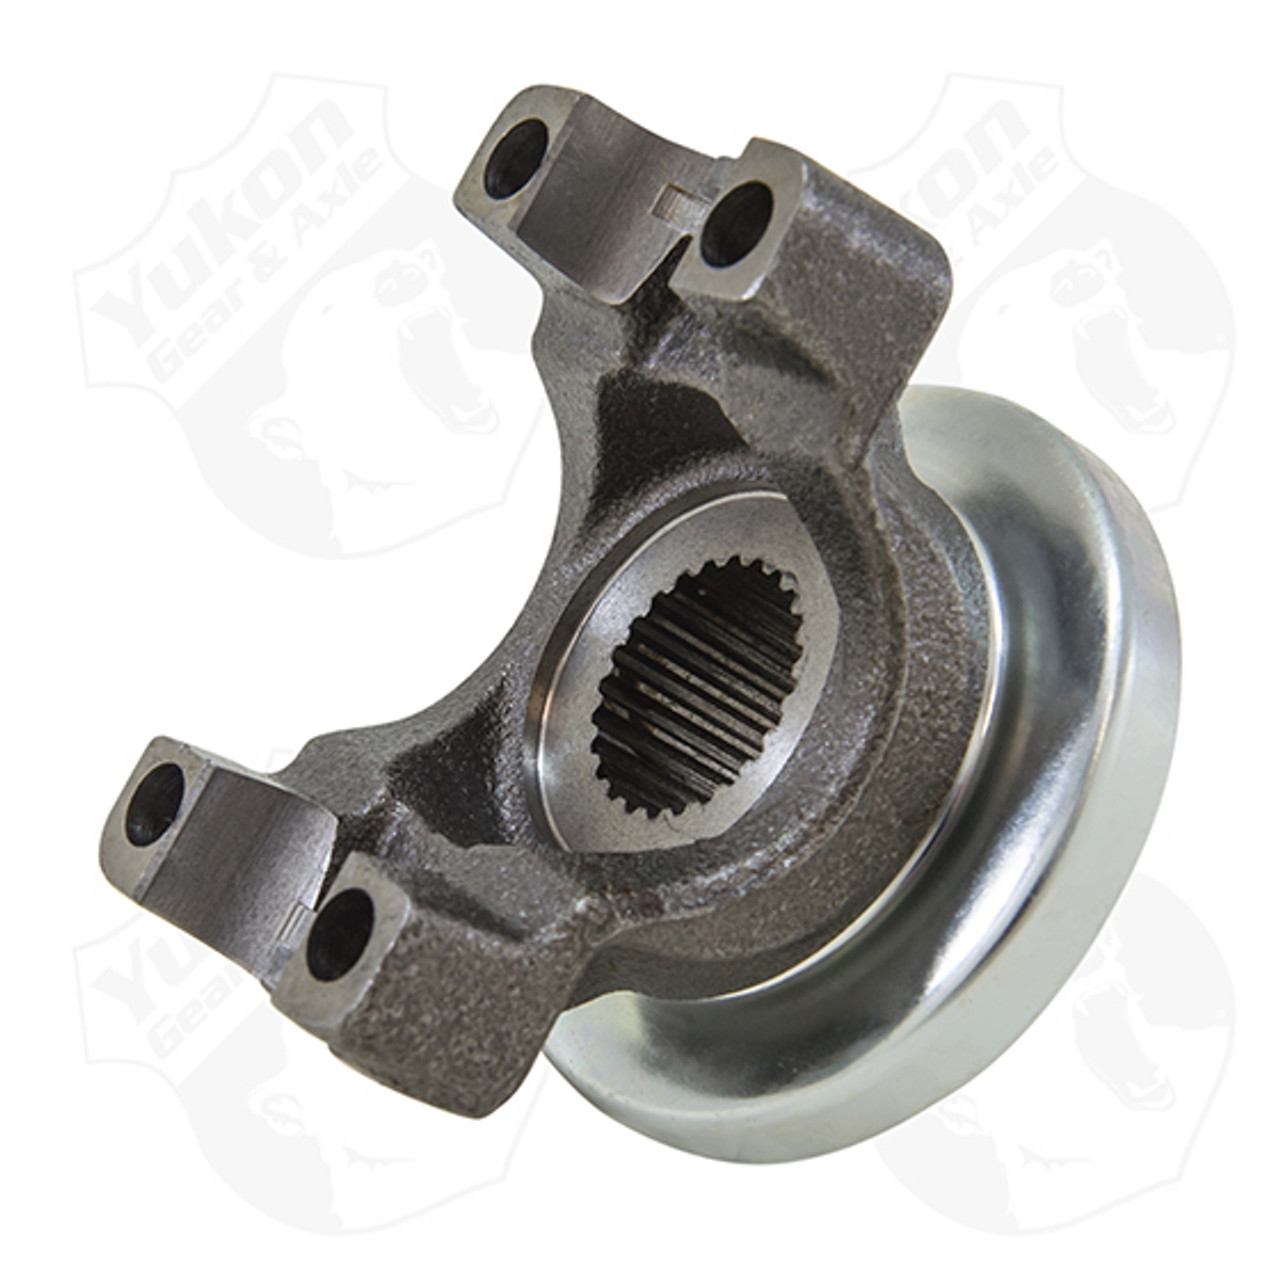 Yukon replacement yoke for Spicer 30 & 44 with 24 spline pinion, 1350 u/joint size